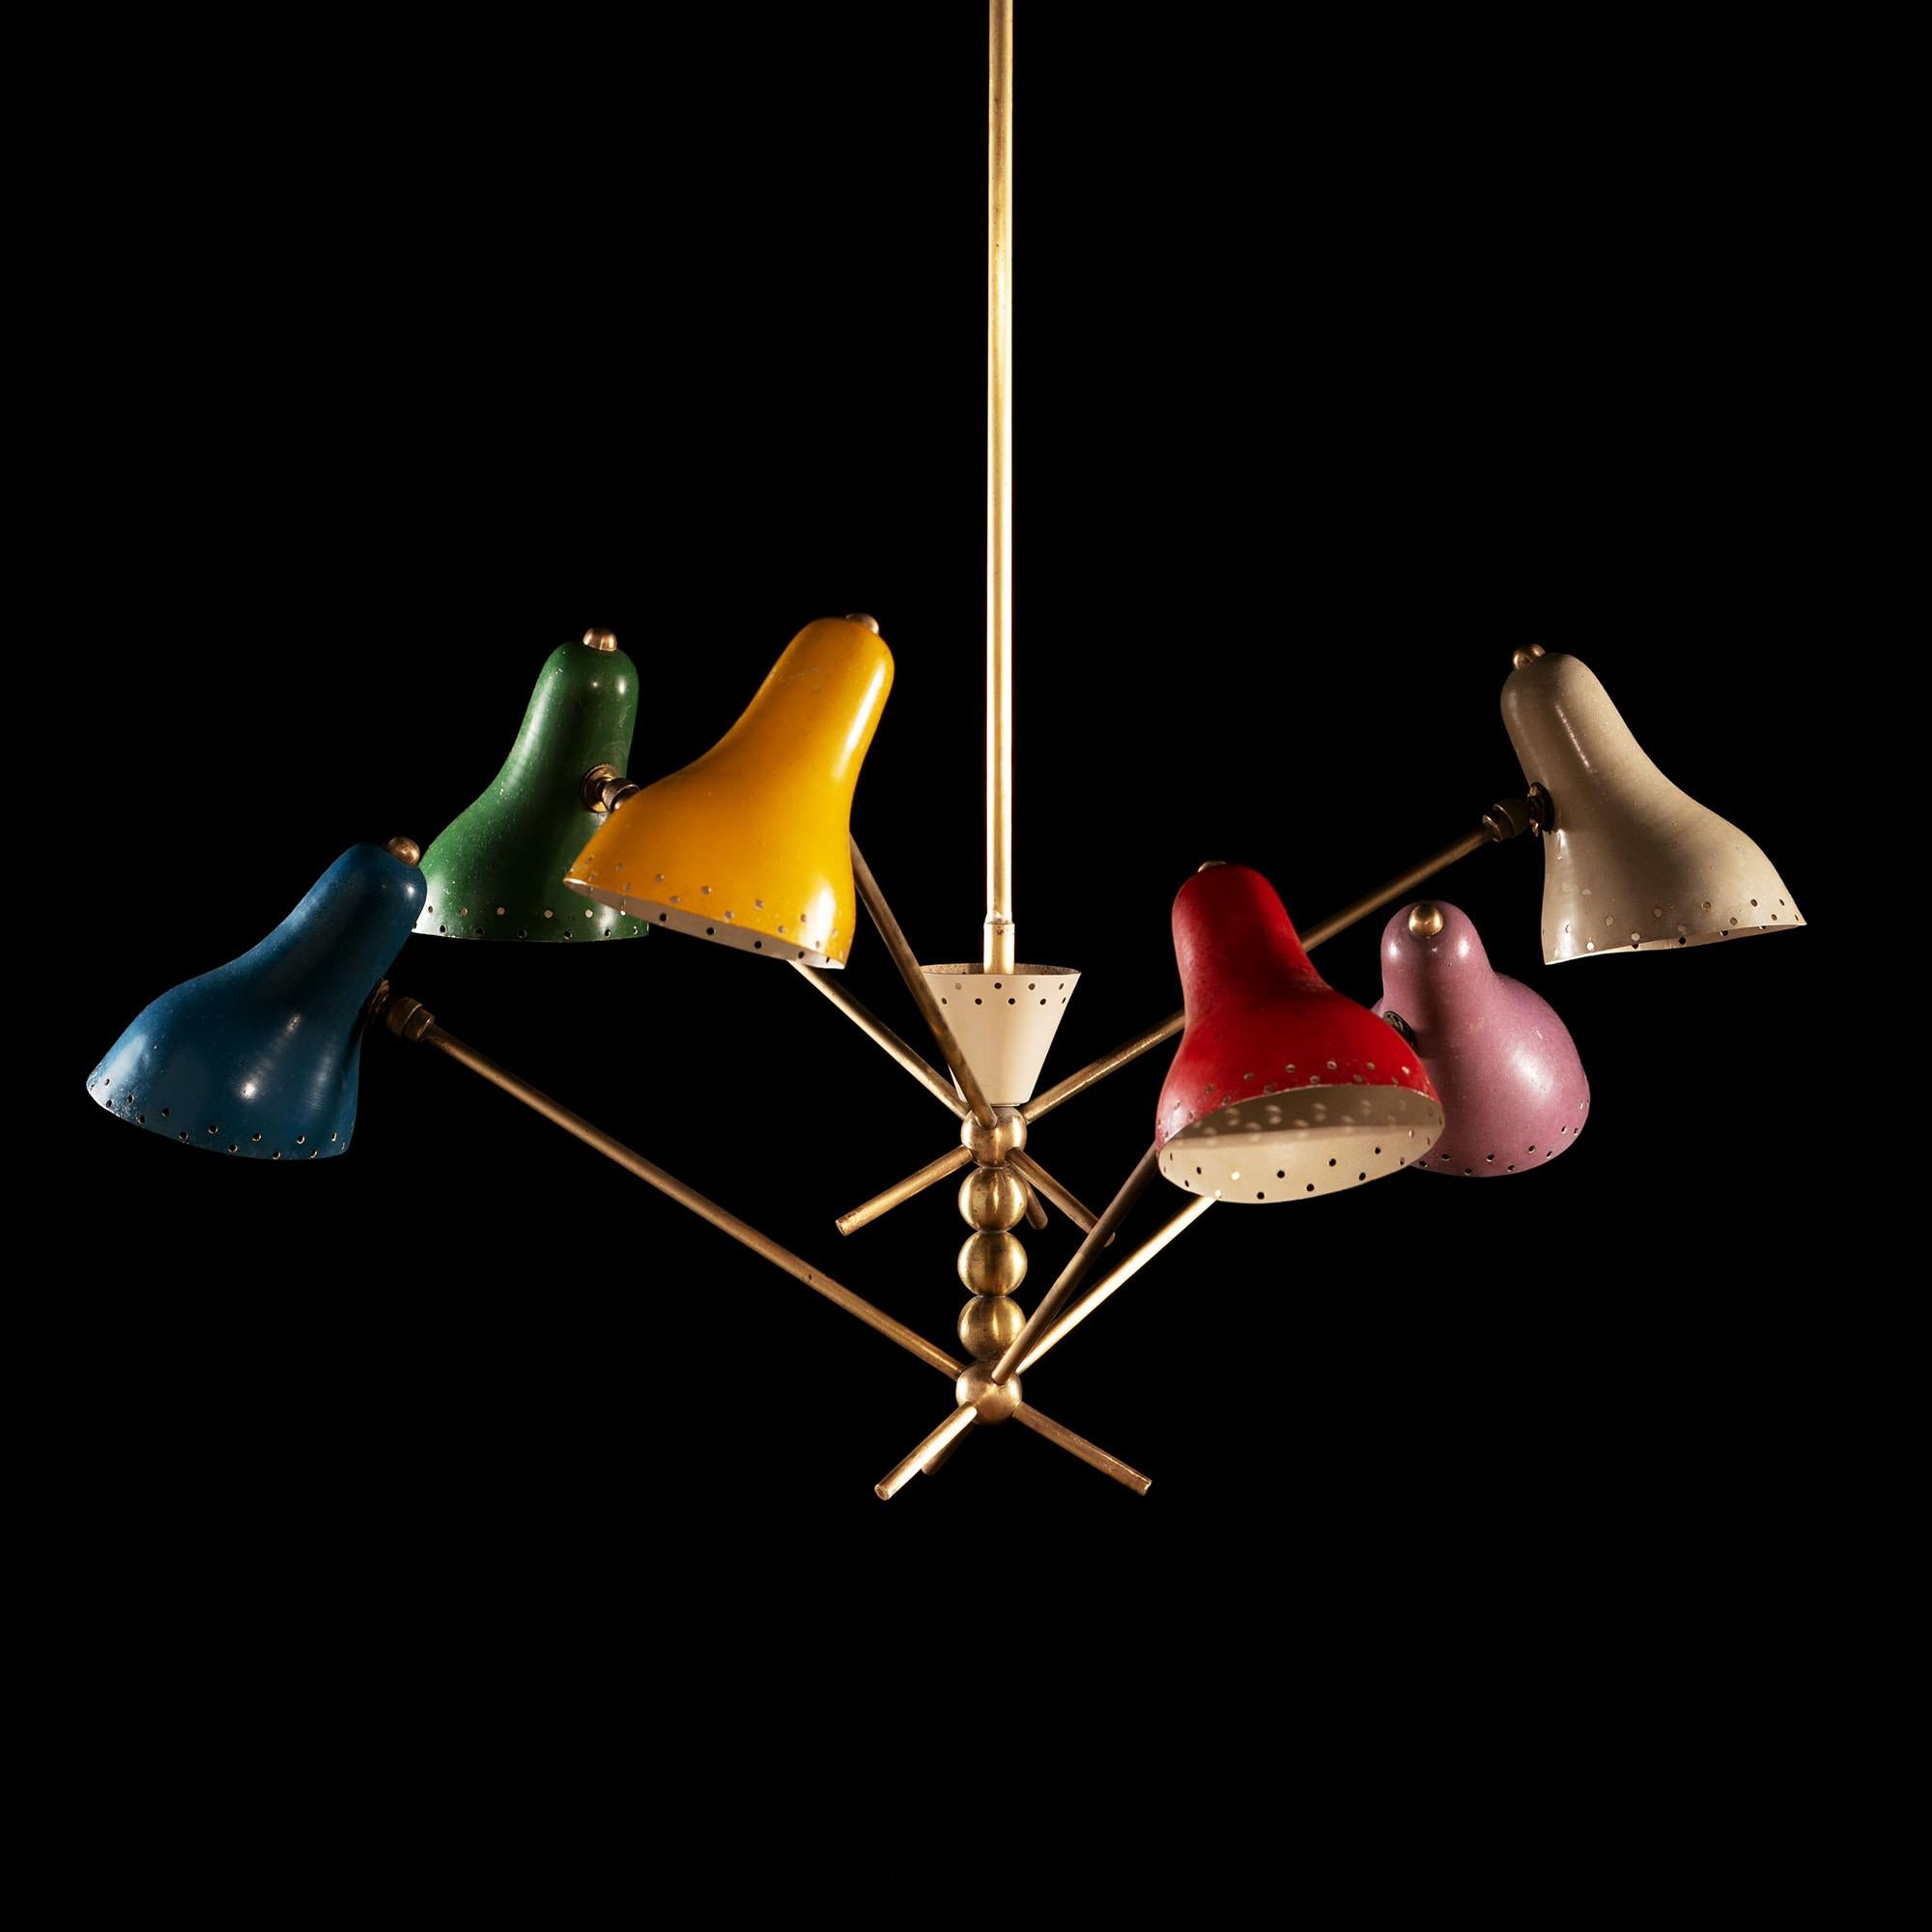 An unusual six arm brass and polychrome hanging light after Angelo Lelli for Arredoluce, each arm with a different colored adjustable metal shade, the central brass stem with fluted ceiling rose to the top, and spherical TOTEM design to the